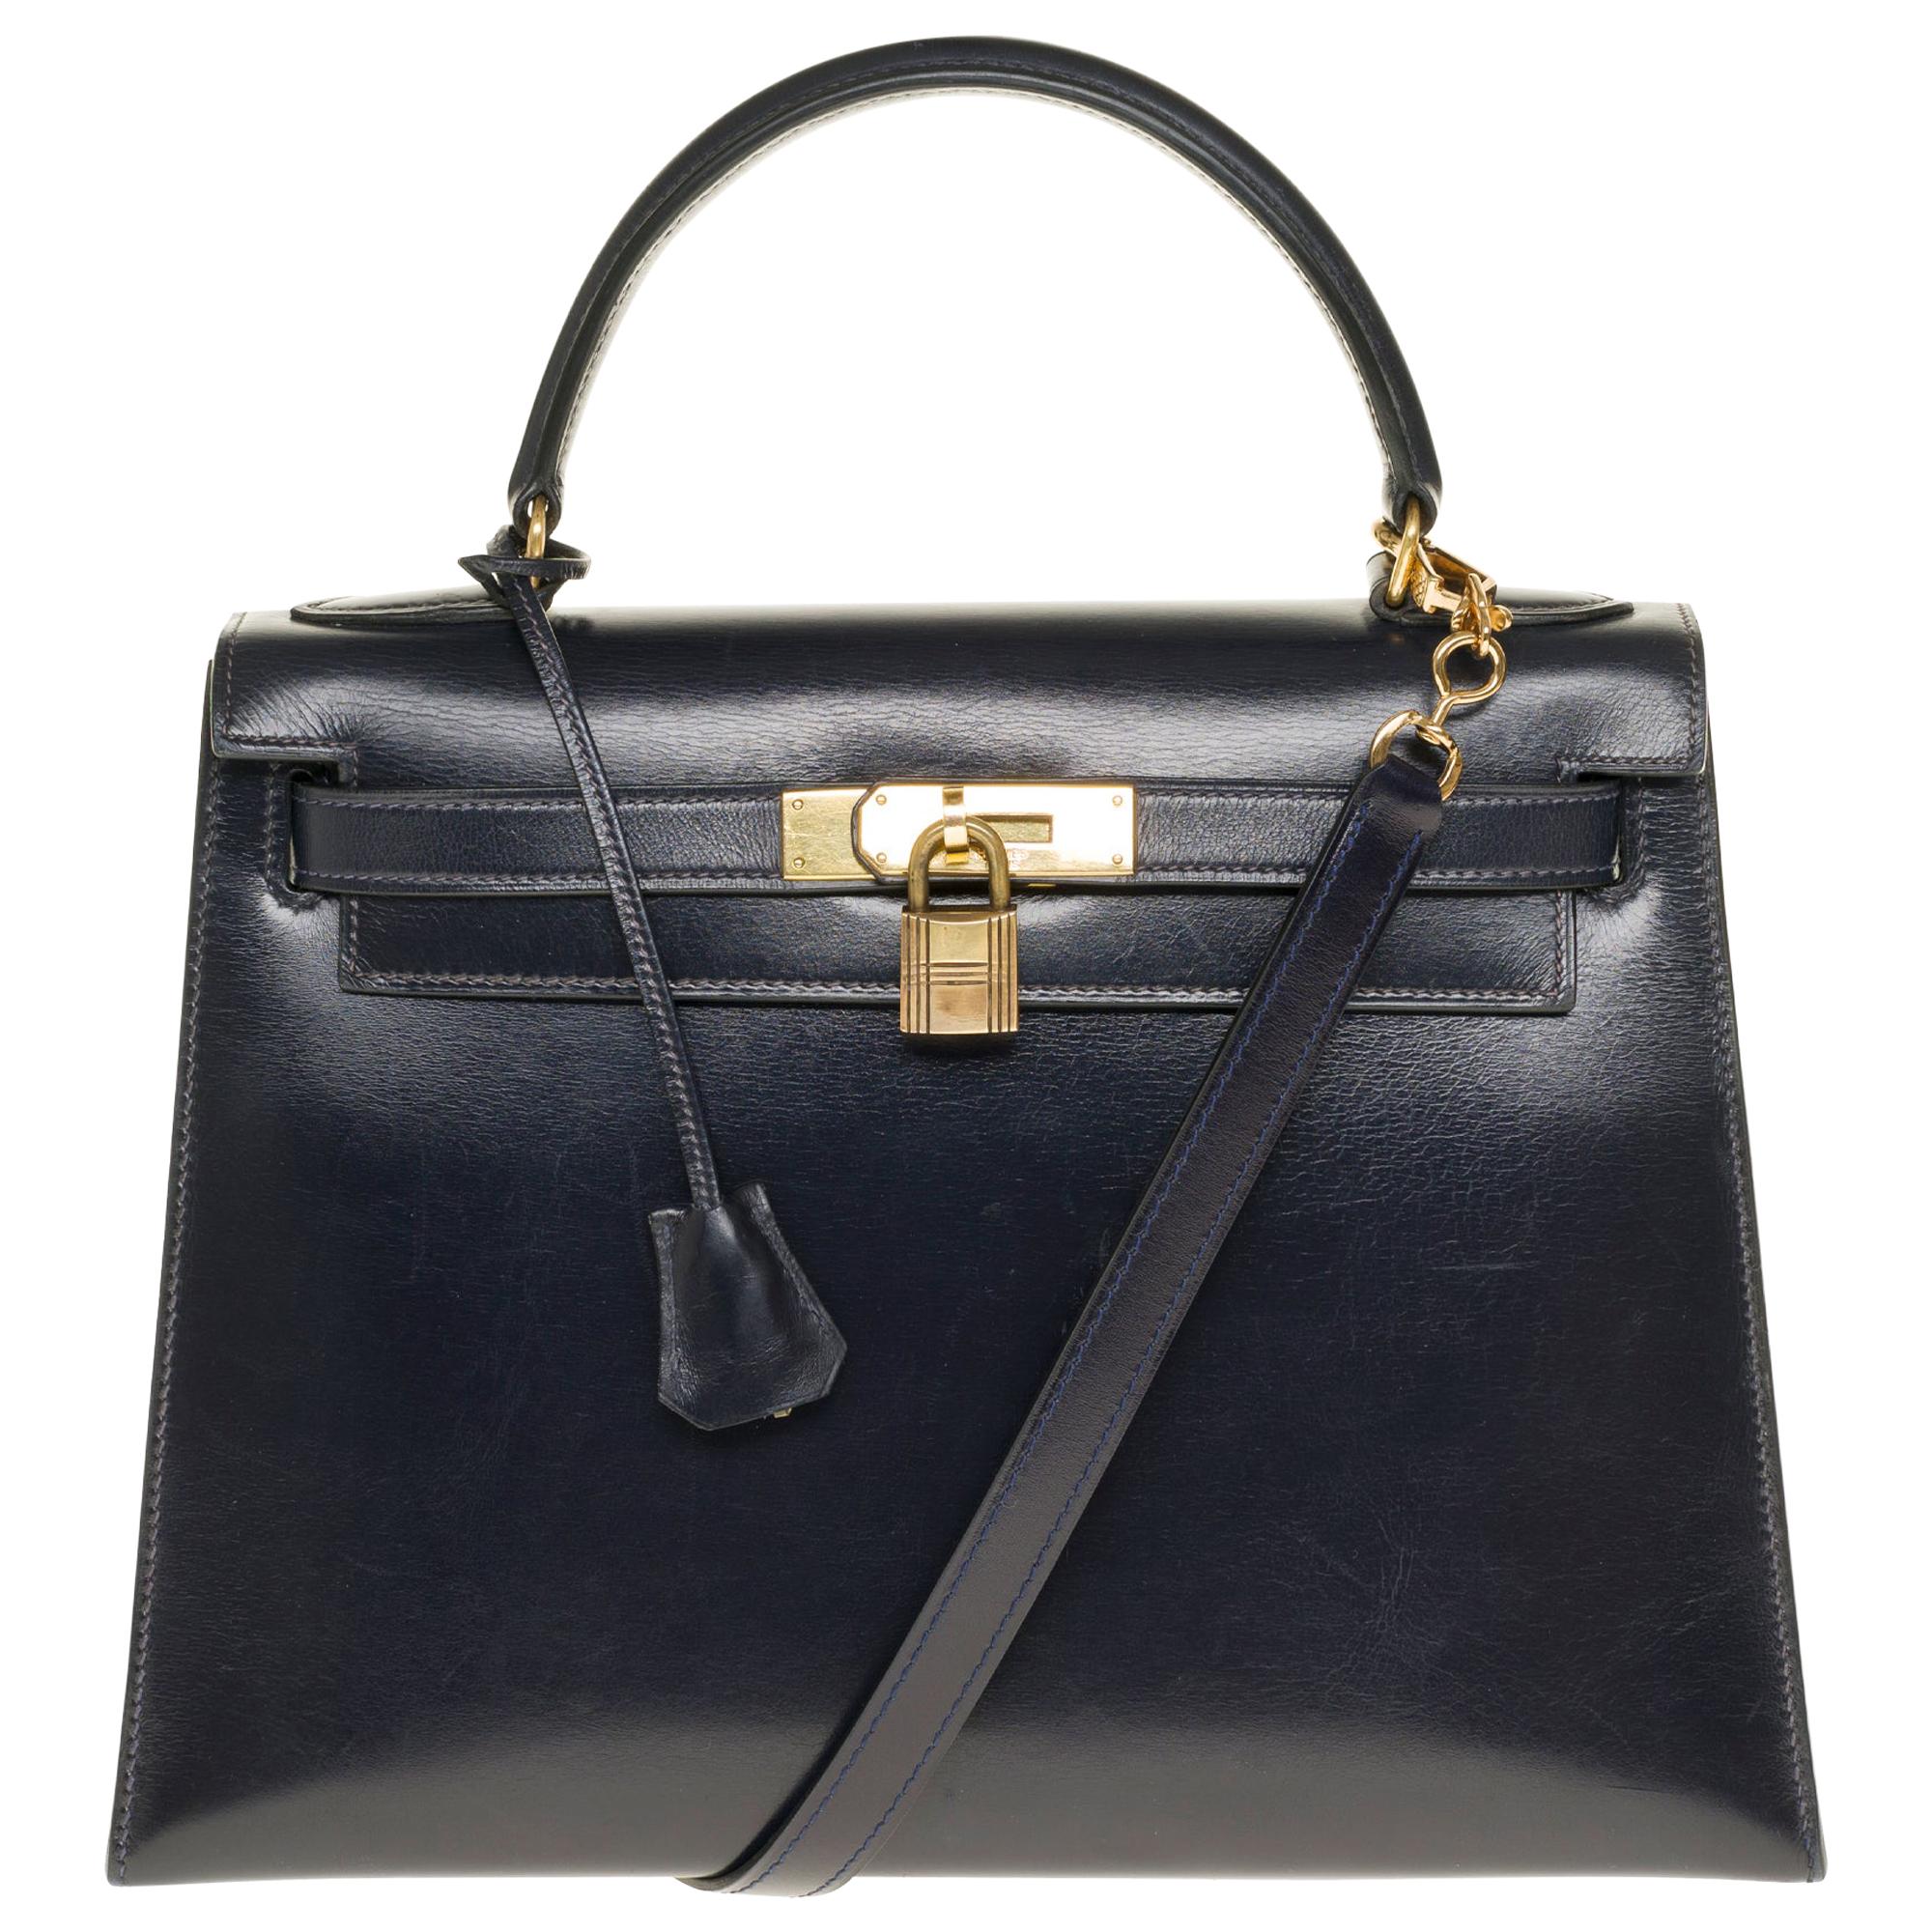 Amazing & Rare Hermès Mini Kelly 30cm sellier strap in navy blue calf and GHW